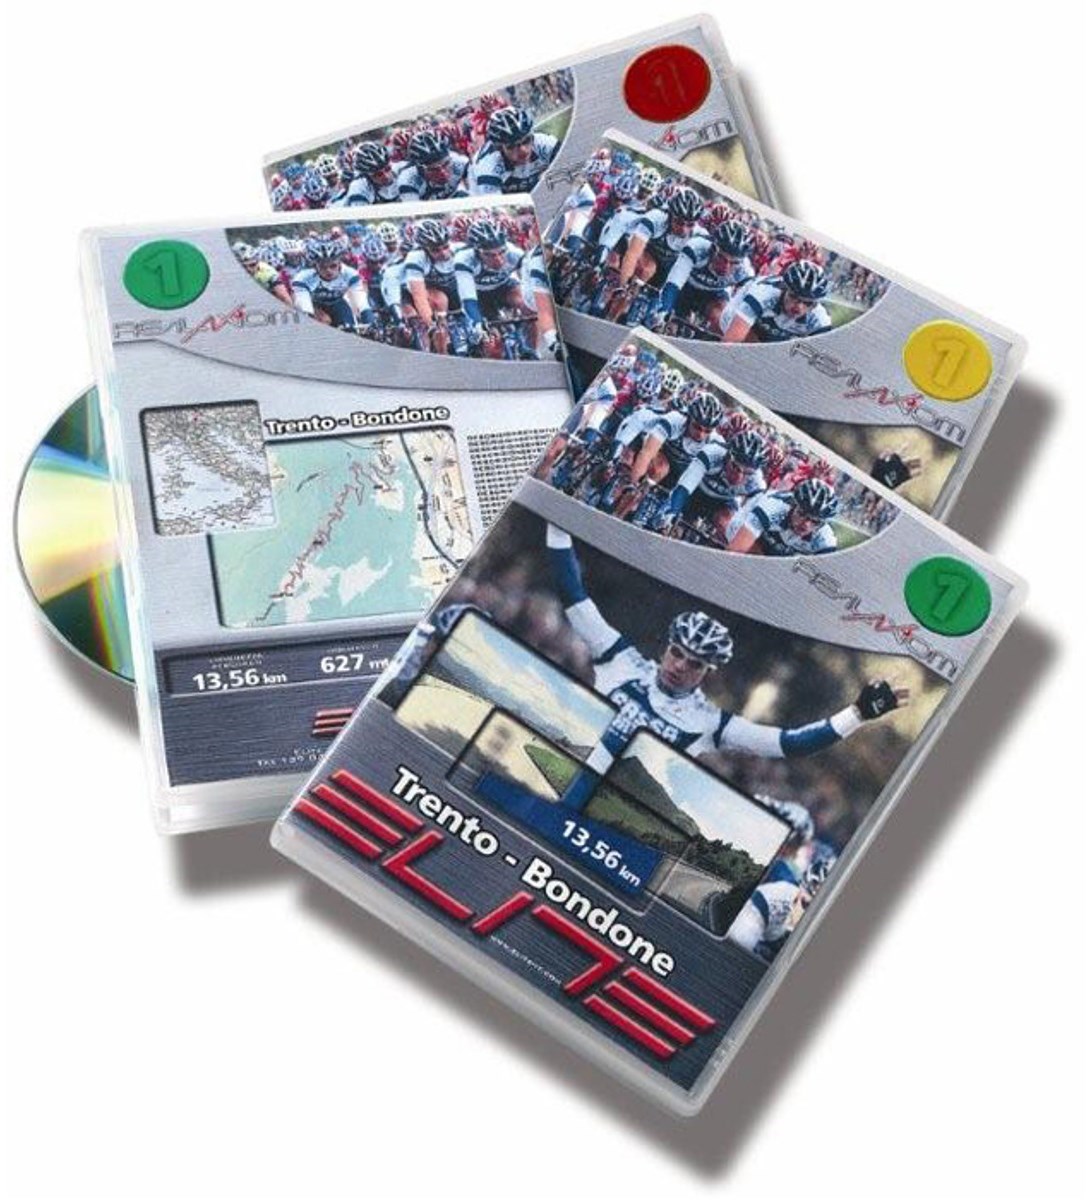 Elite DVD Course For All Elite Reality Trainers: Plan De Corones product image